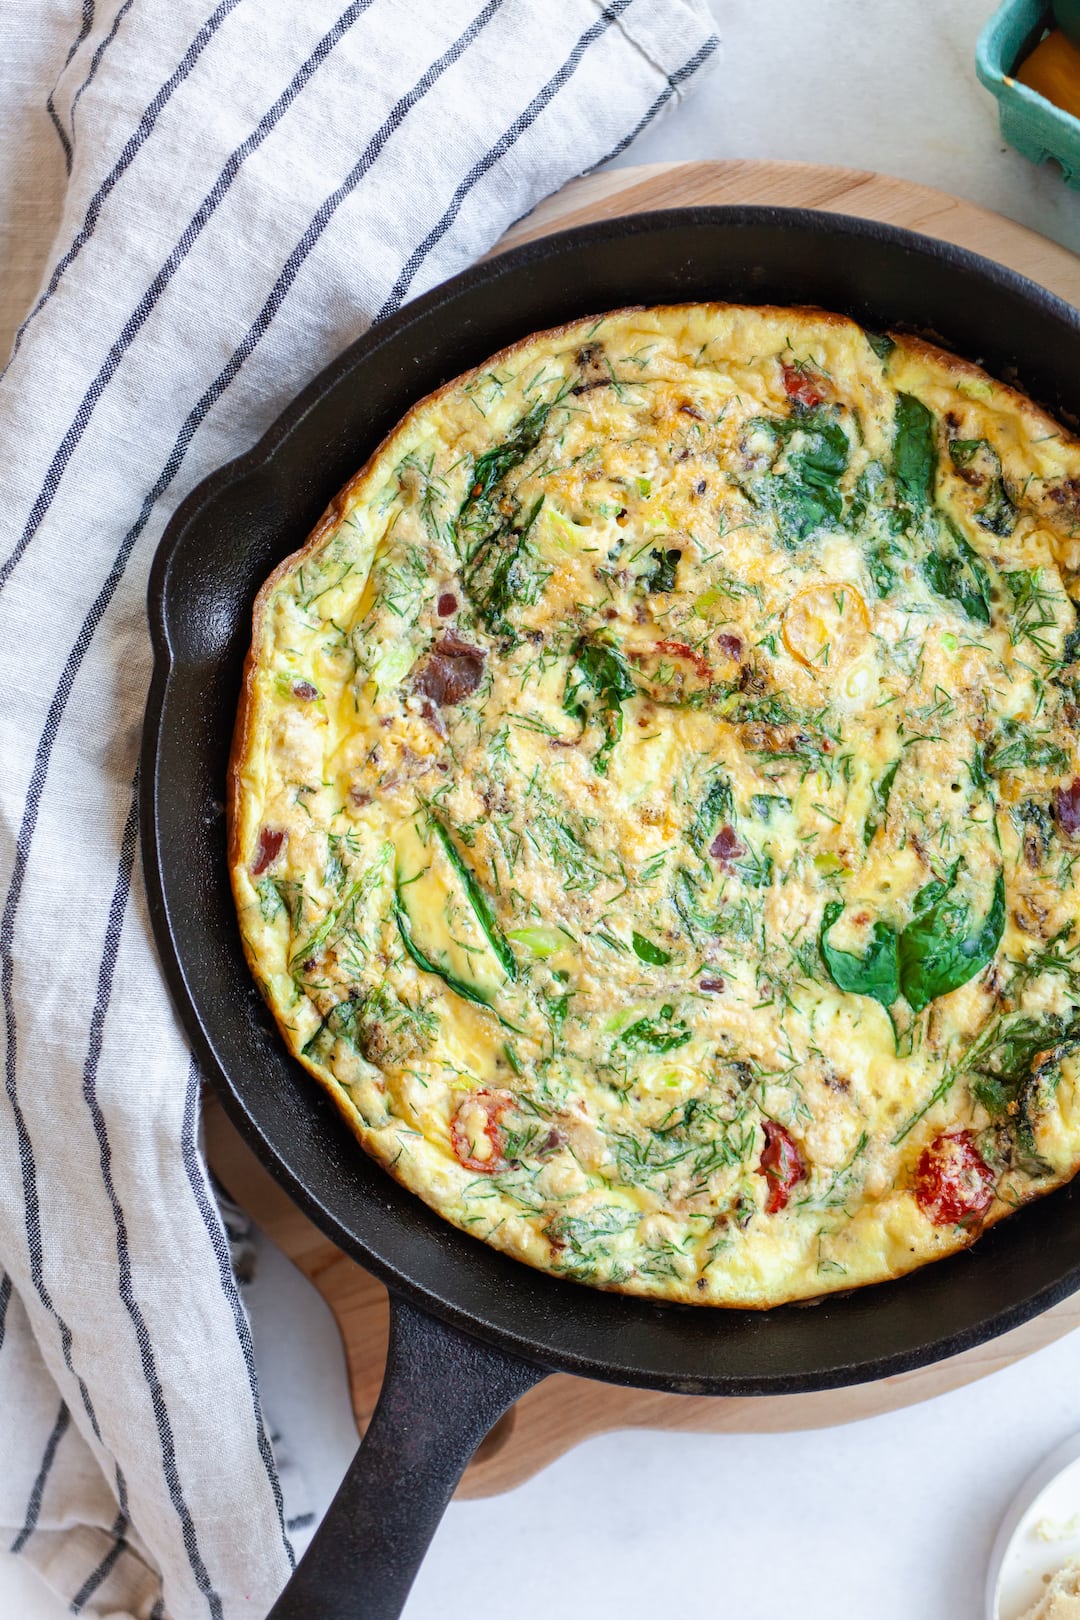 Cooked frittata in a skillet with vegetables